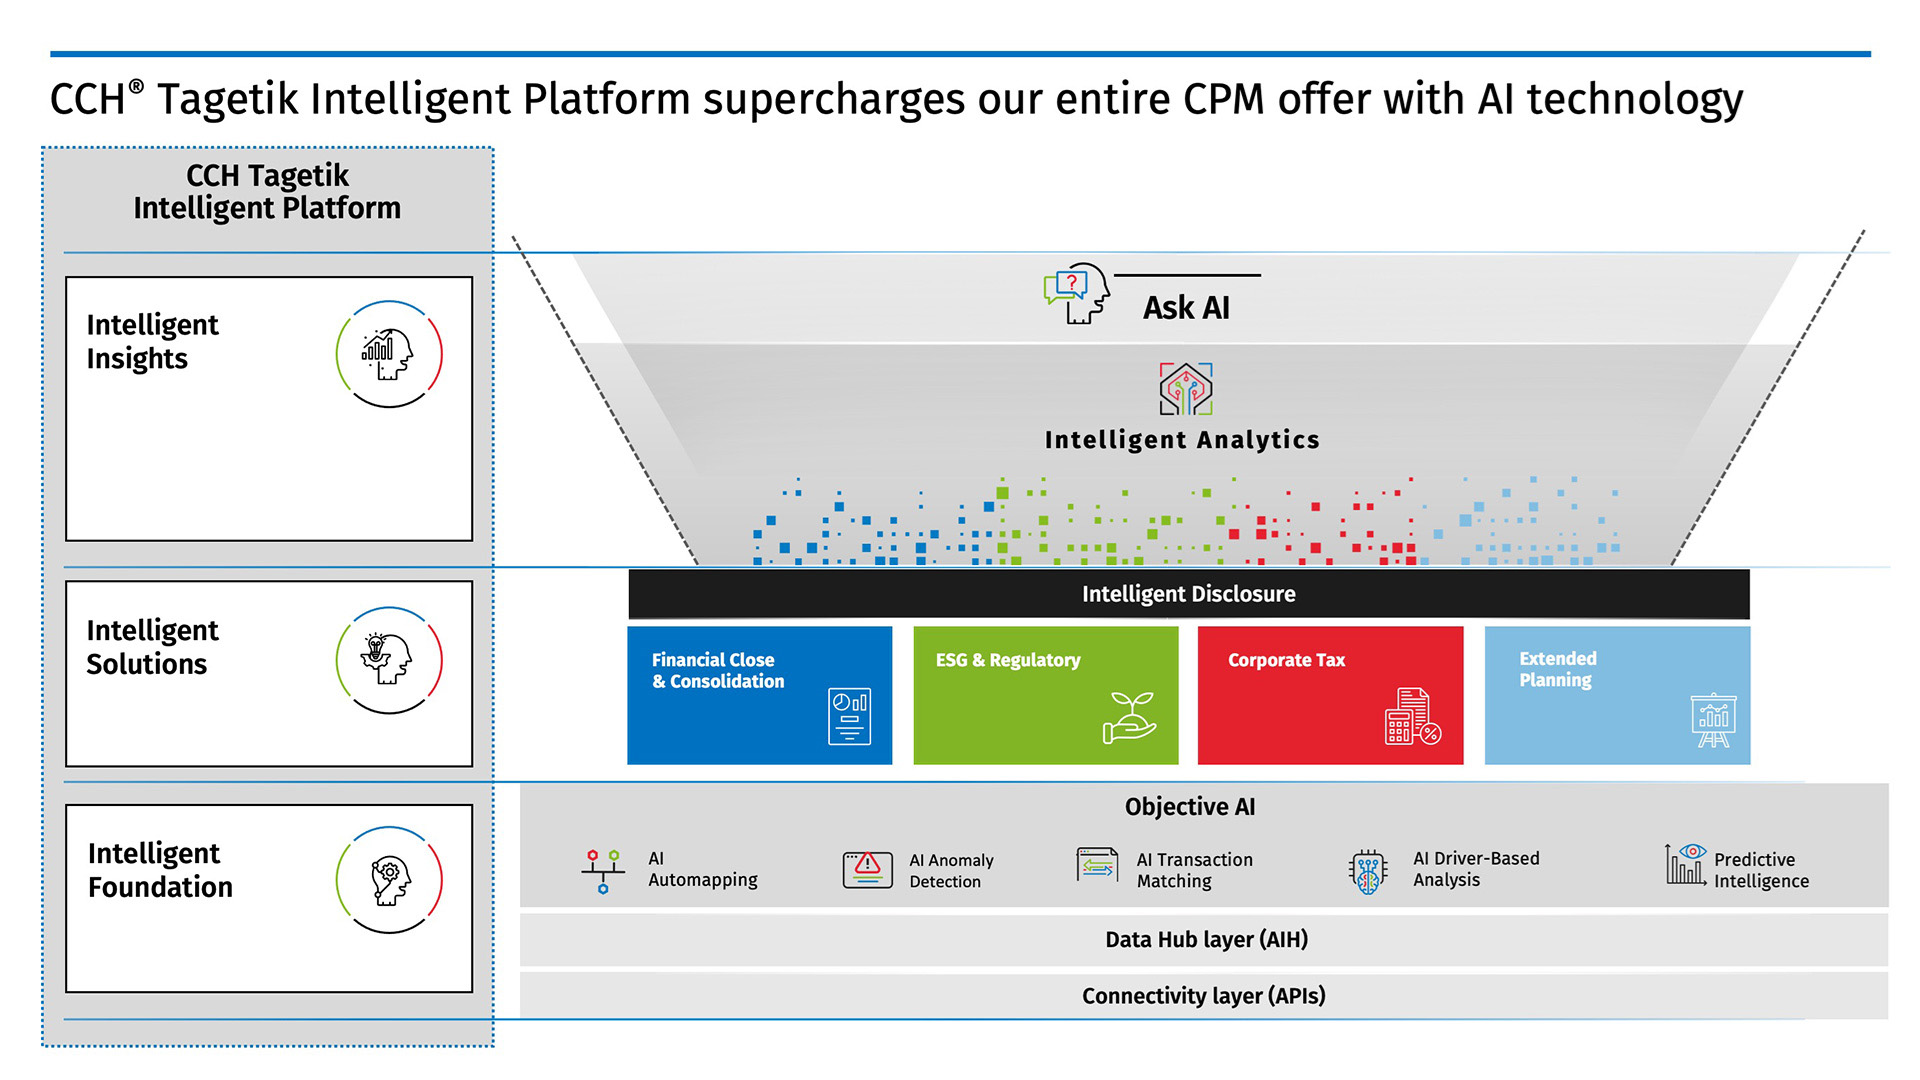 AI-powered CCH Tagetik Intelligent Platform supercharges our entire CPM offer